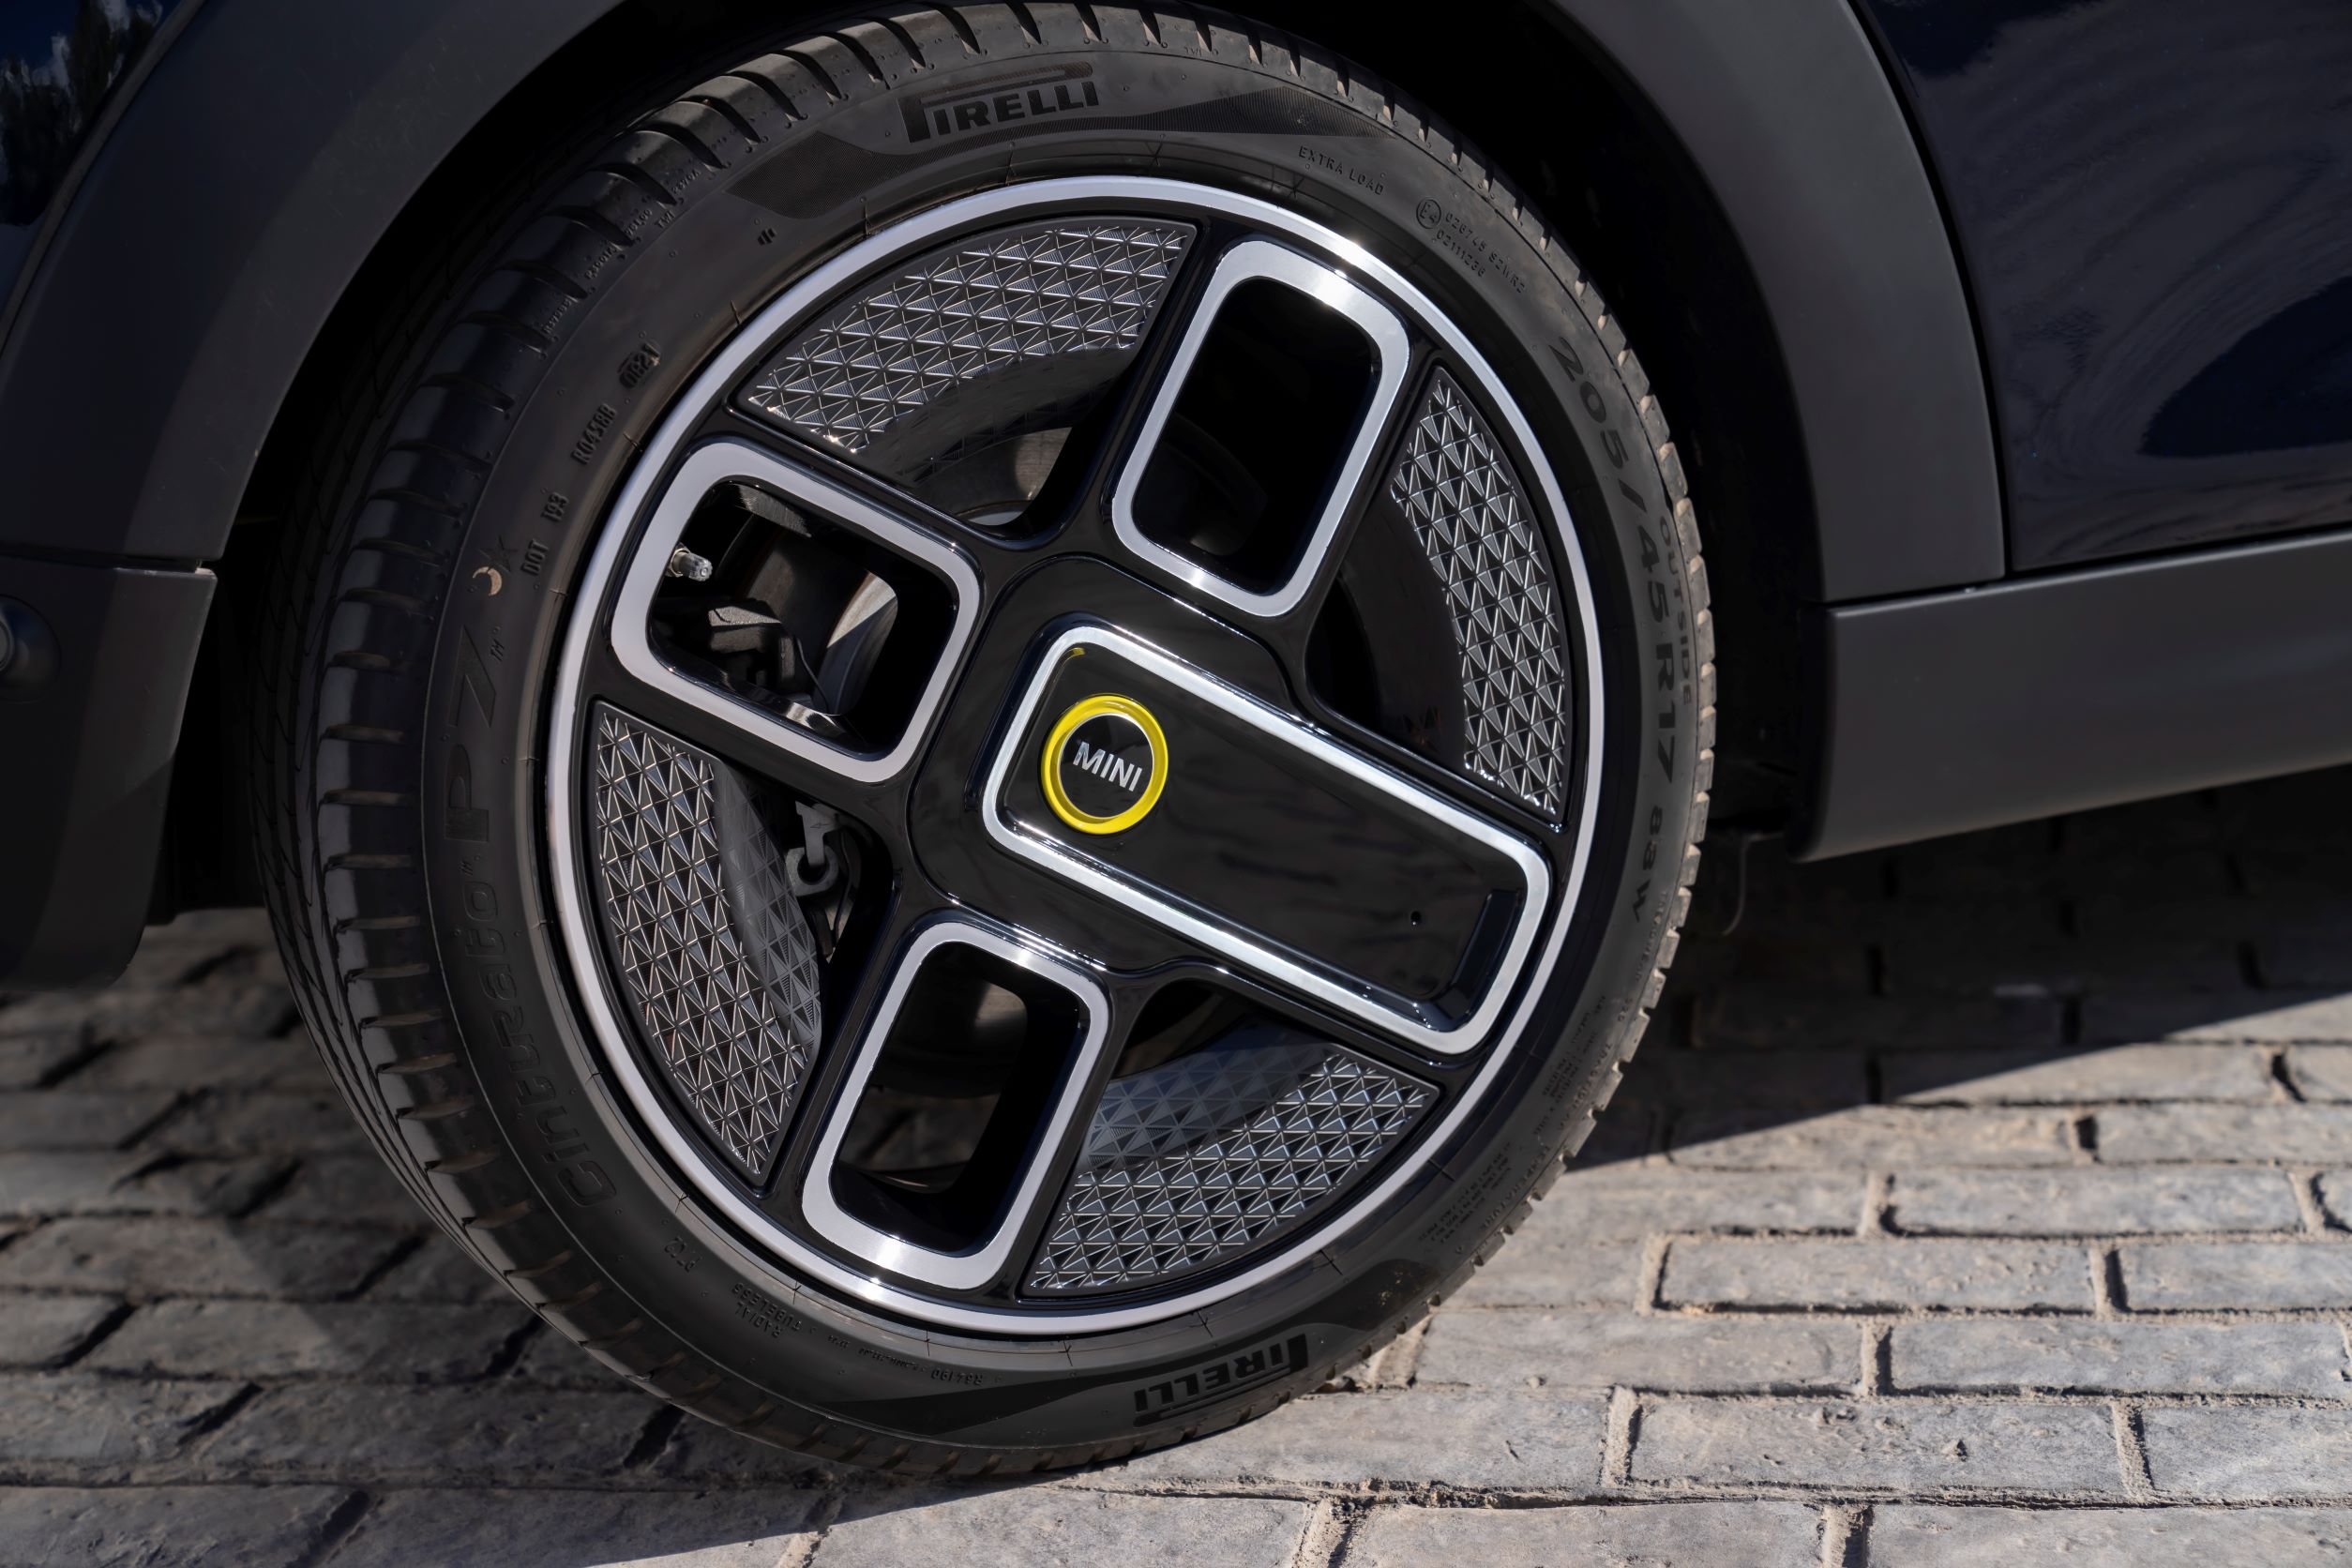 A close-up of the new recycled wheel from Mini